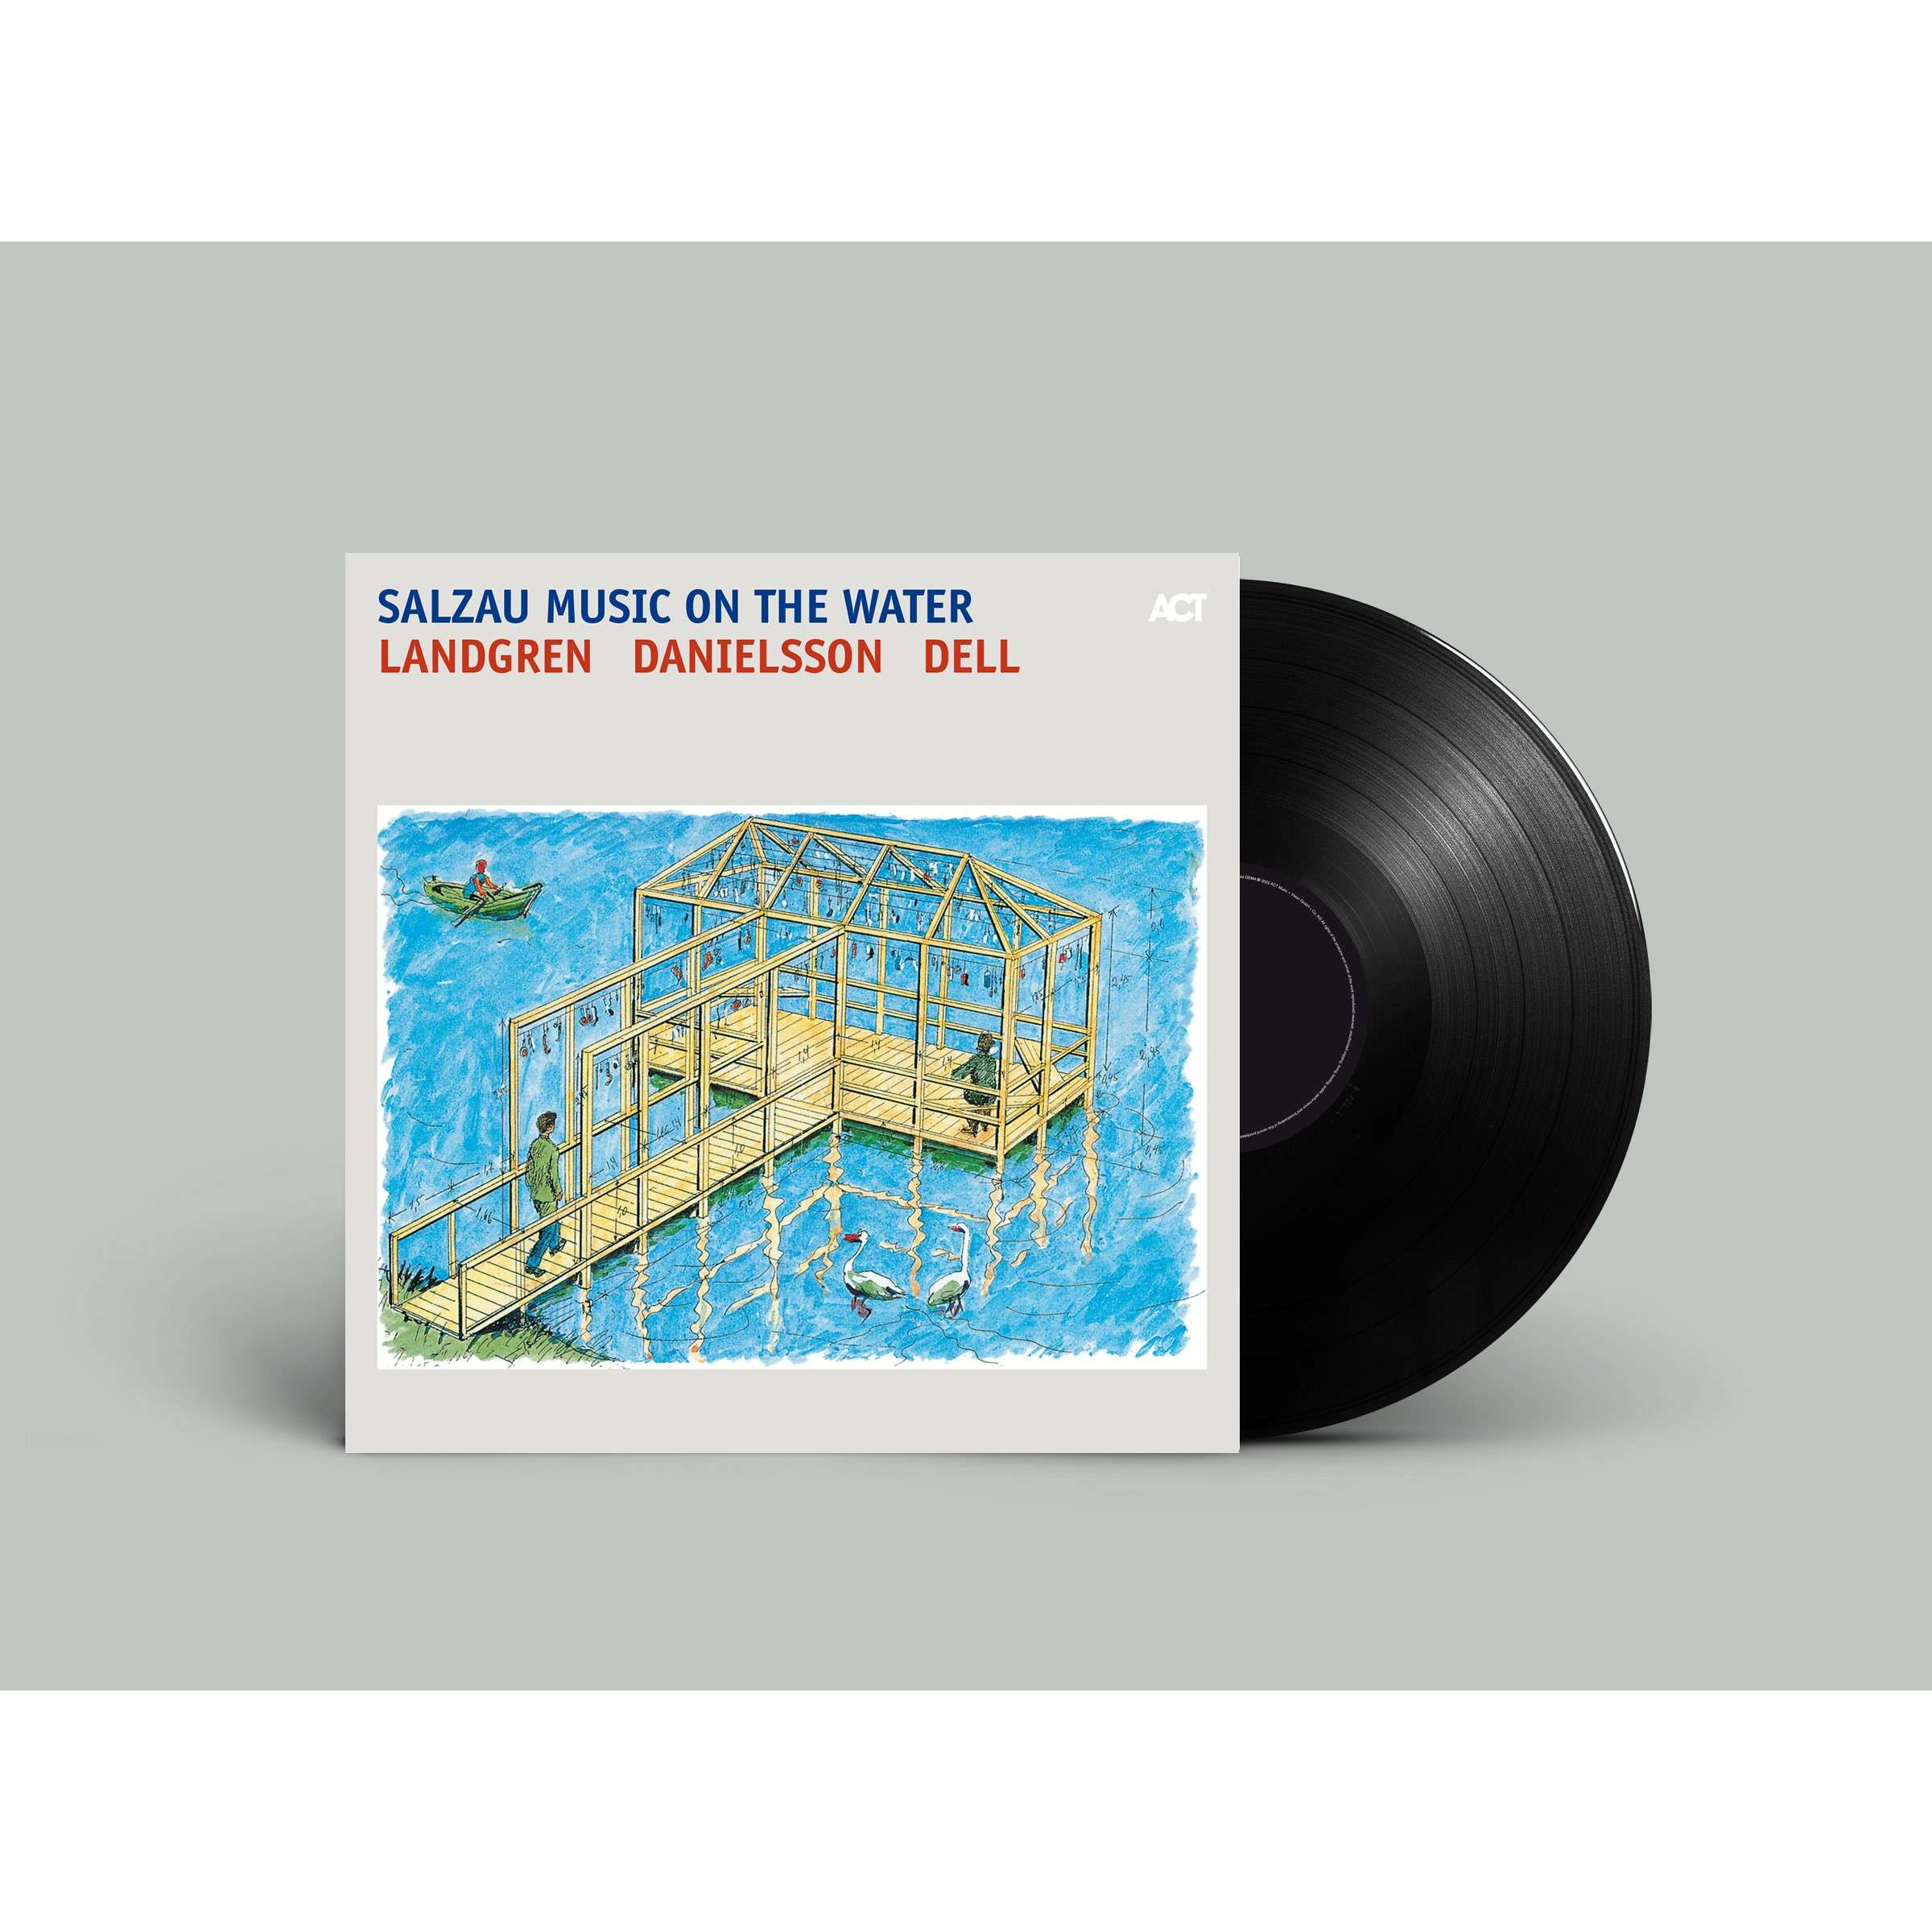 SALZAU MUSIC ON THE WATER  [LP 180G HIGH RES DOWNLOAD CODE]